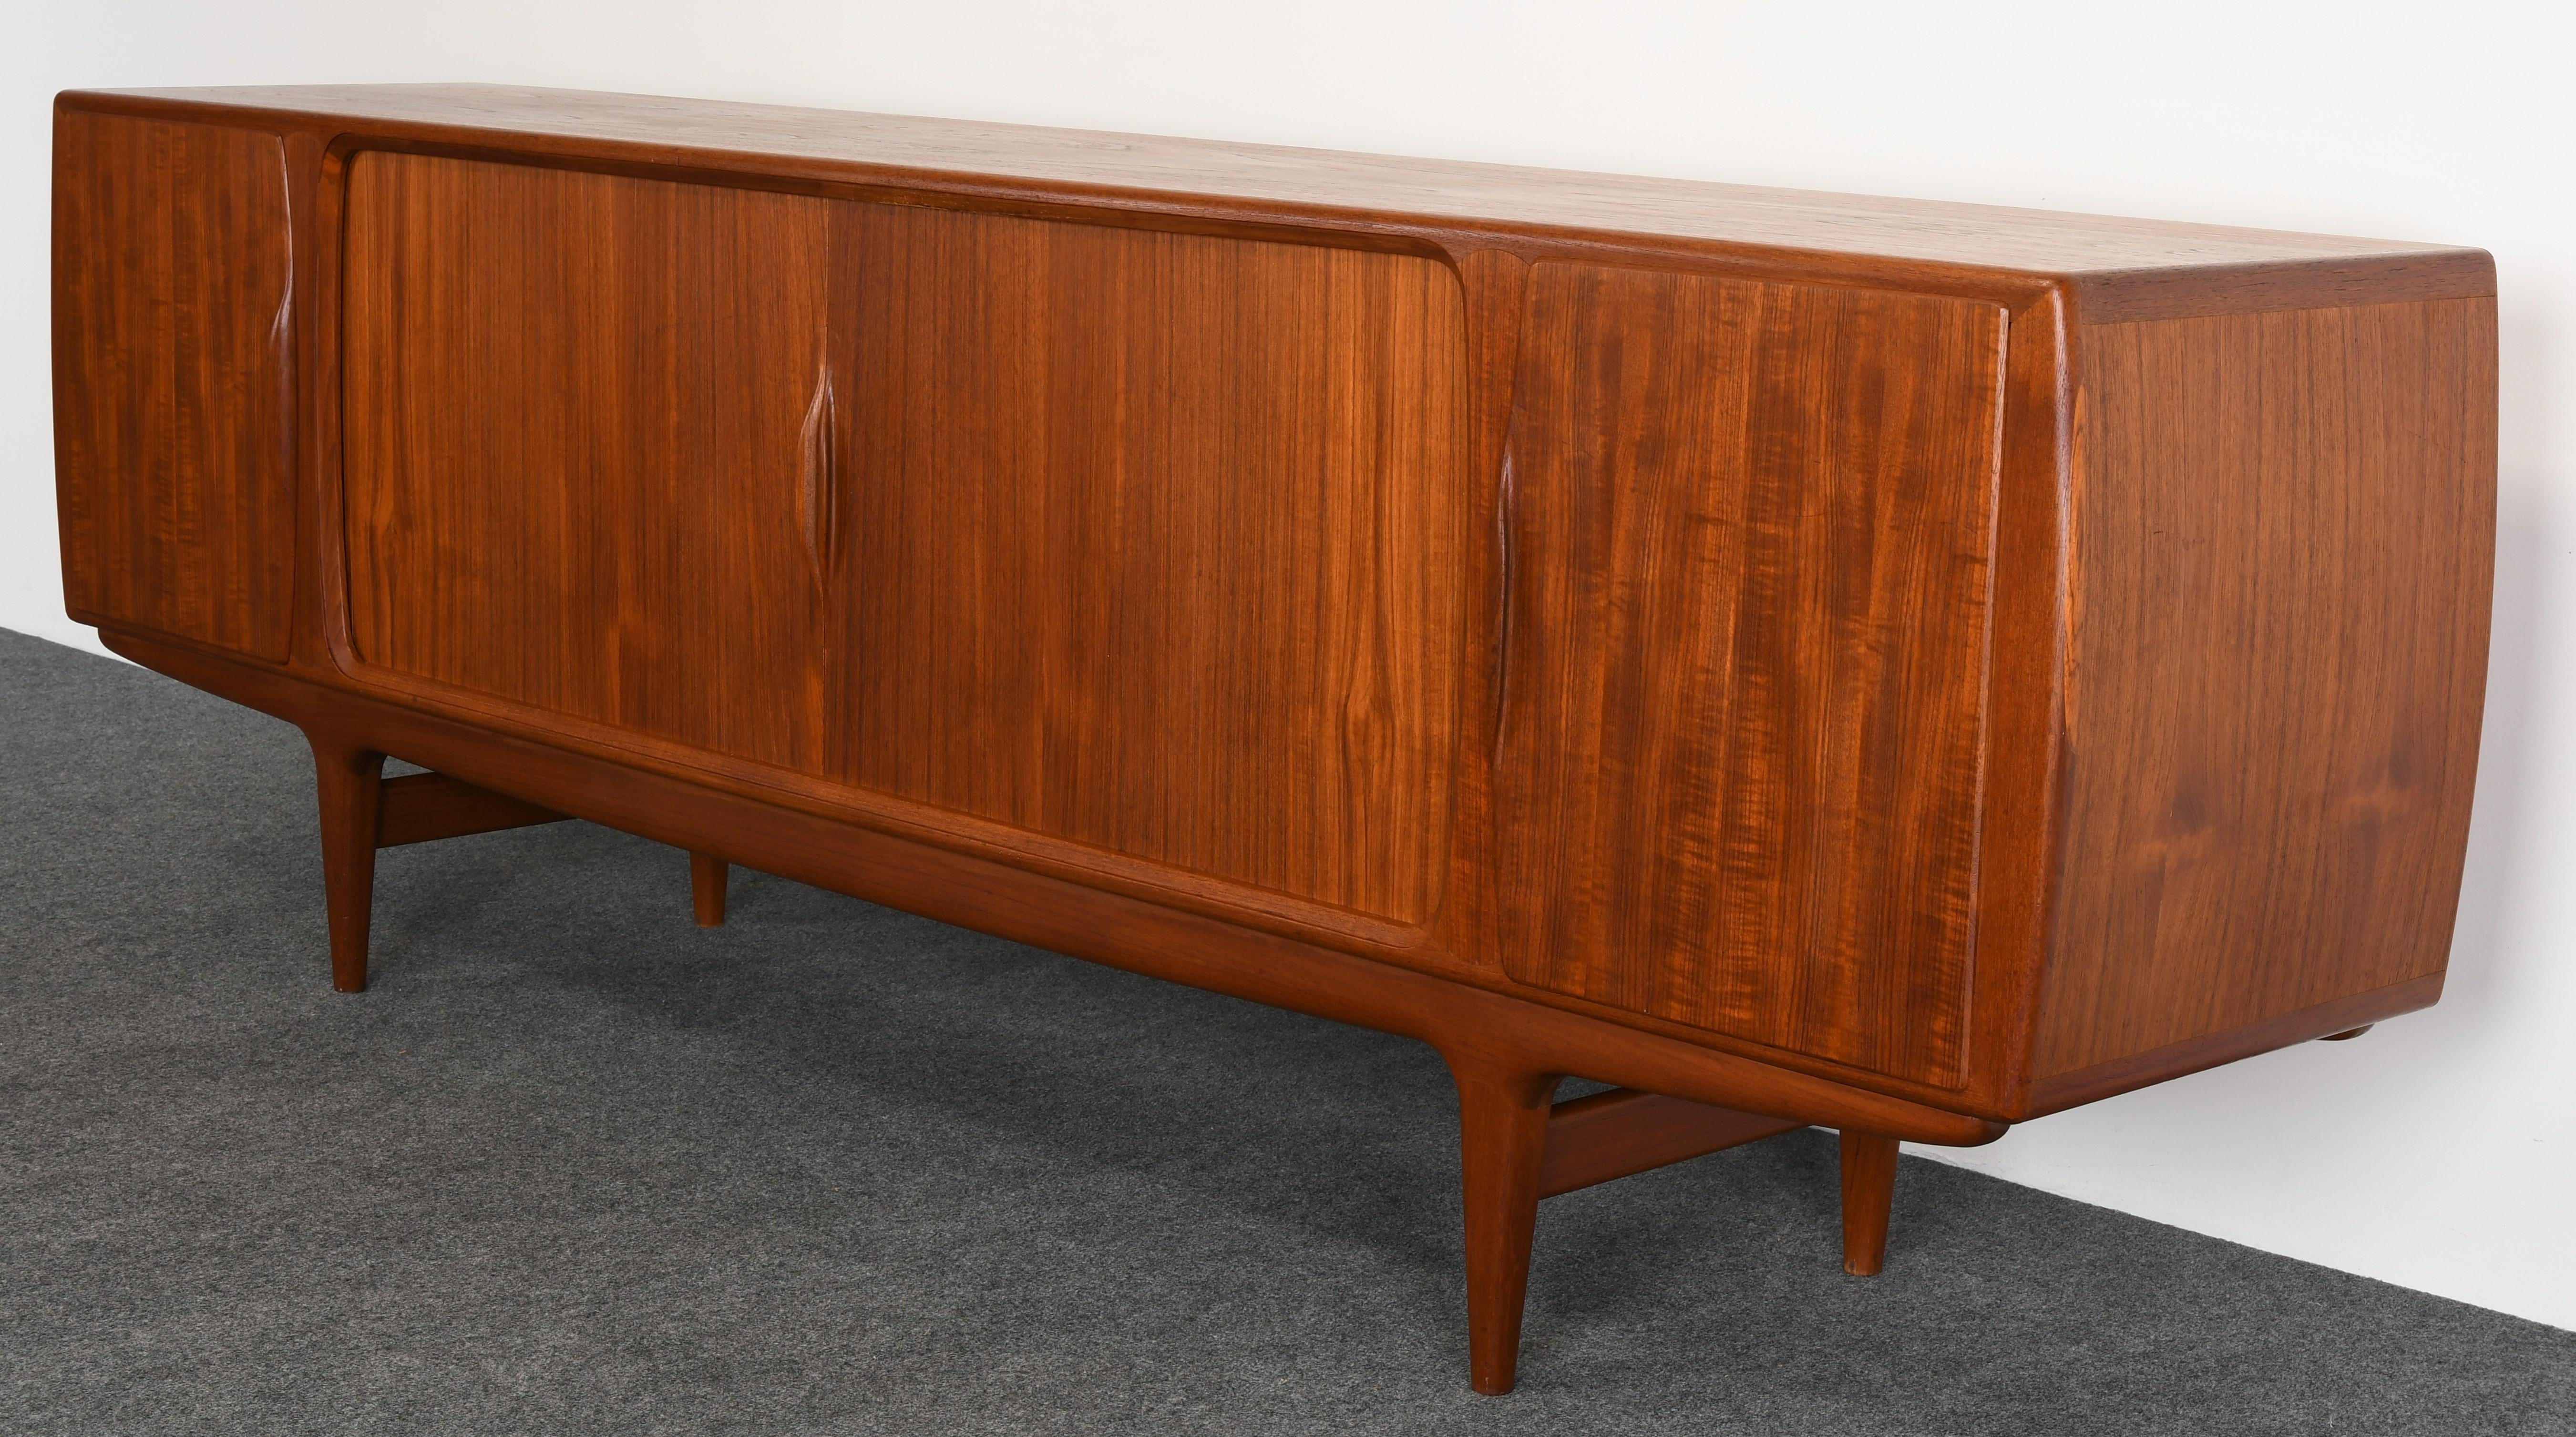 A stunning Mid-Century Modern teak credenza or sideboard designed by Johannes Andersen, 1950s. The interior has ample storage space with adjustable shelves and lined silverware drawers. Very good condition, some minor scratches to surface, not